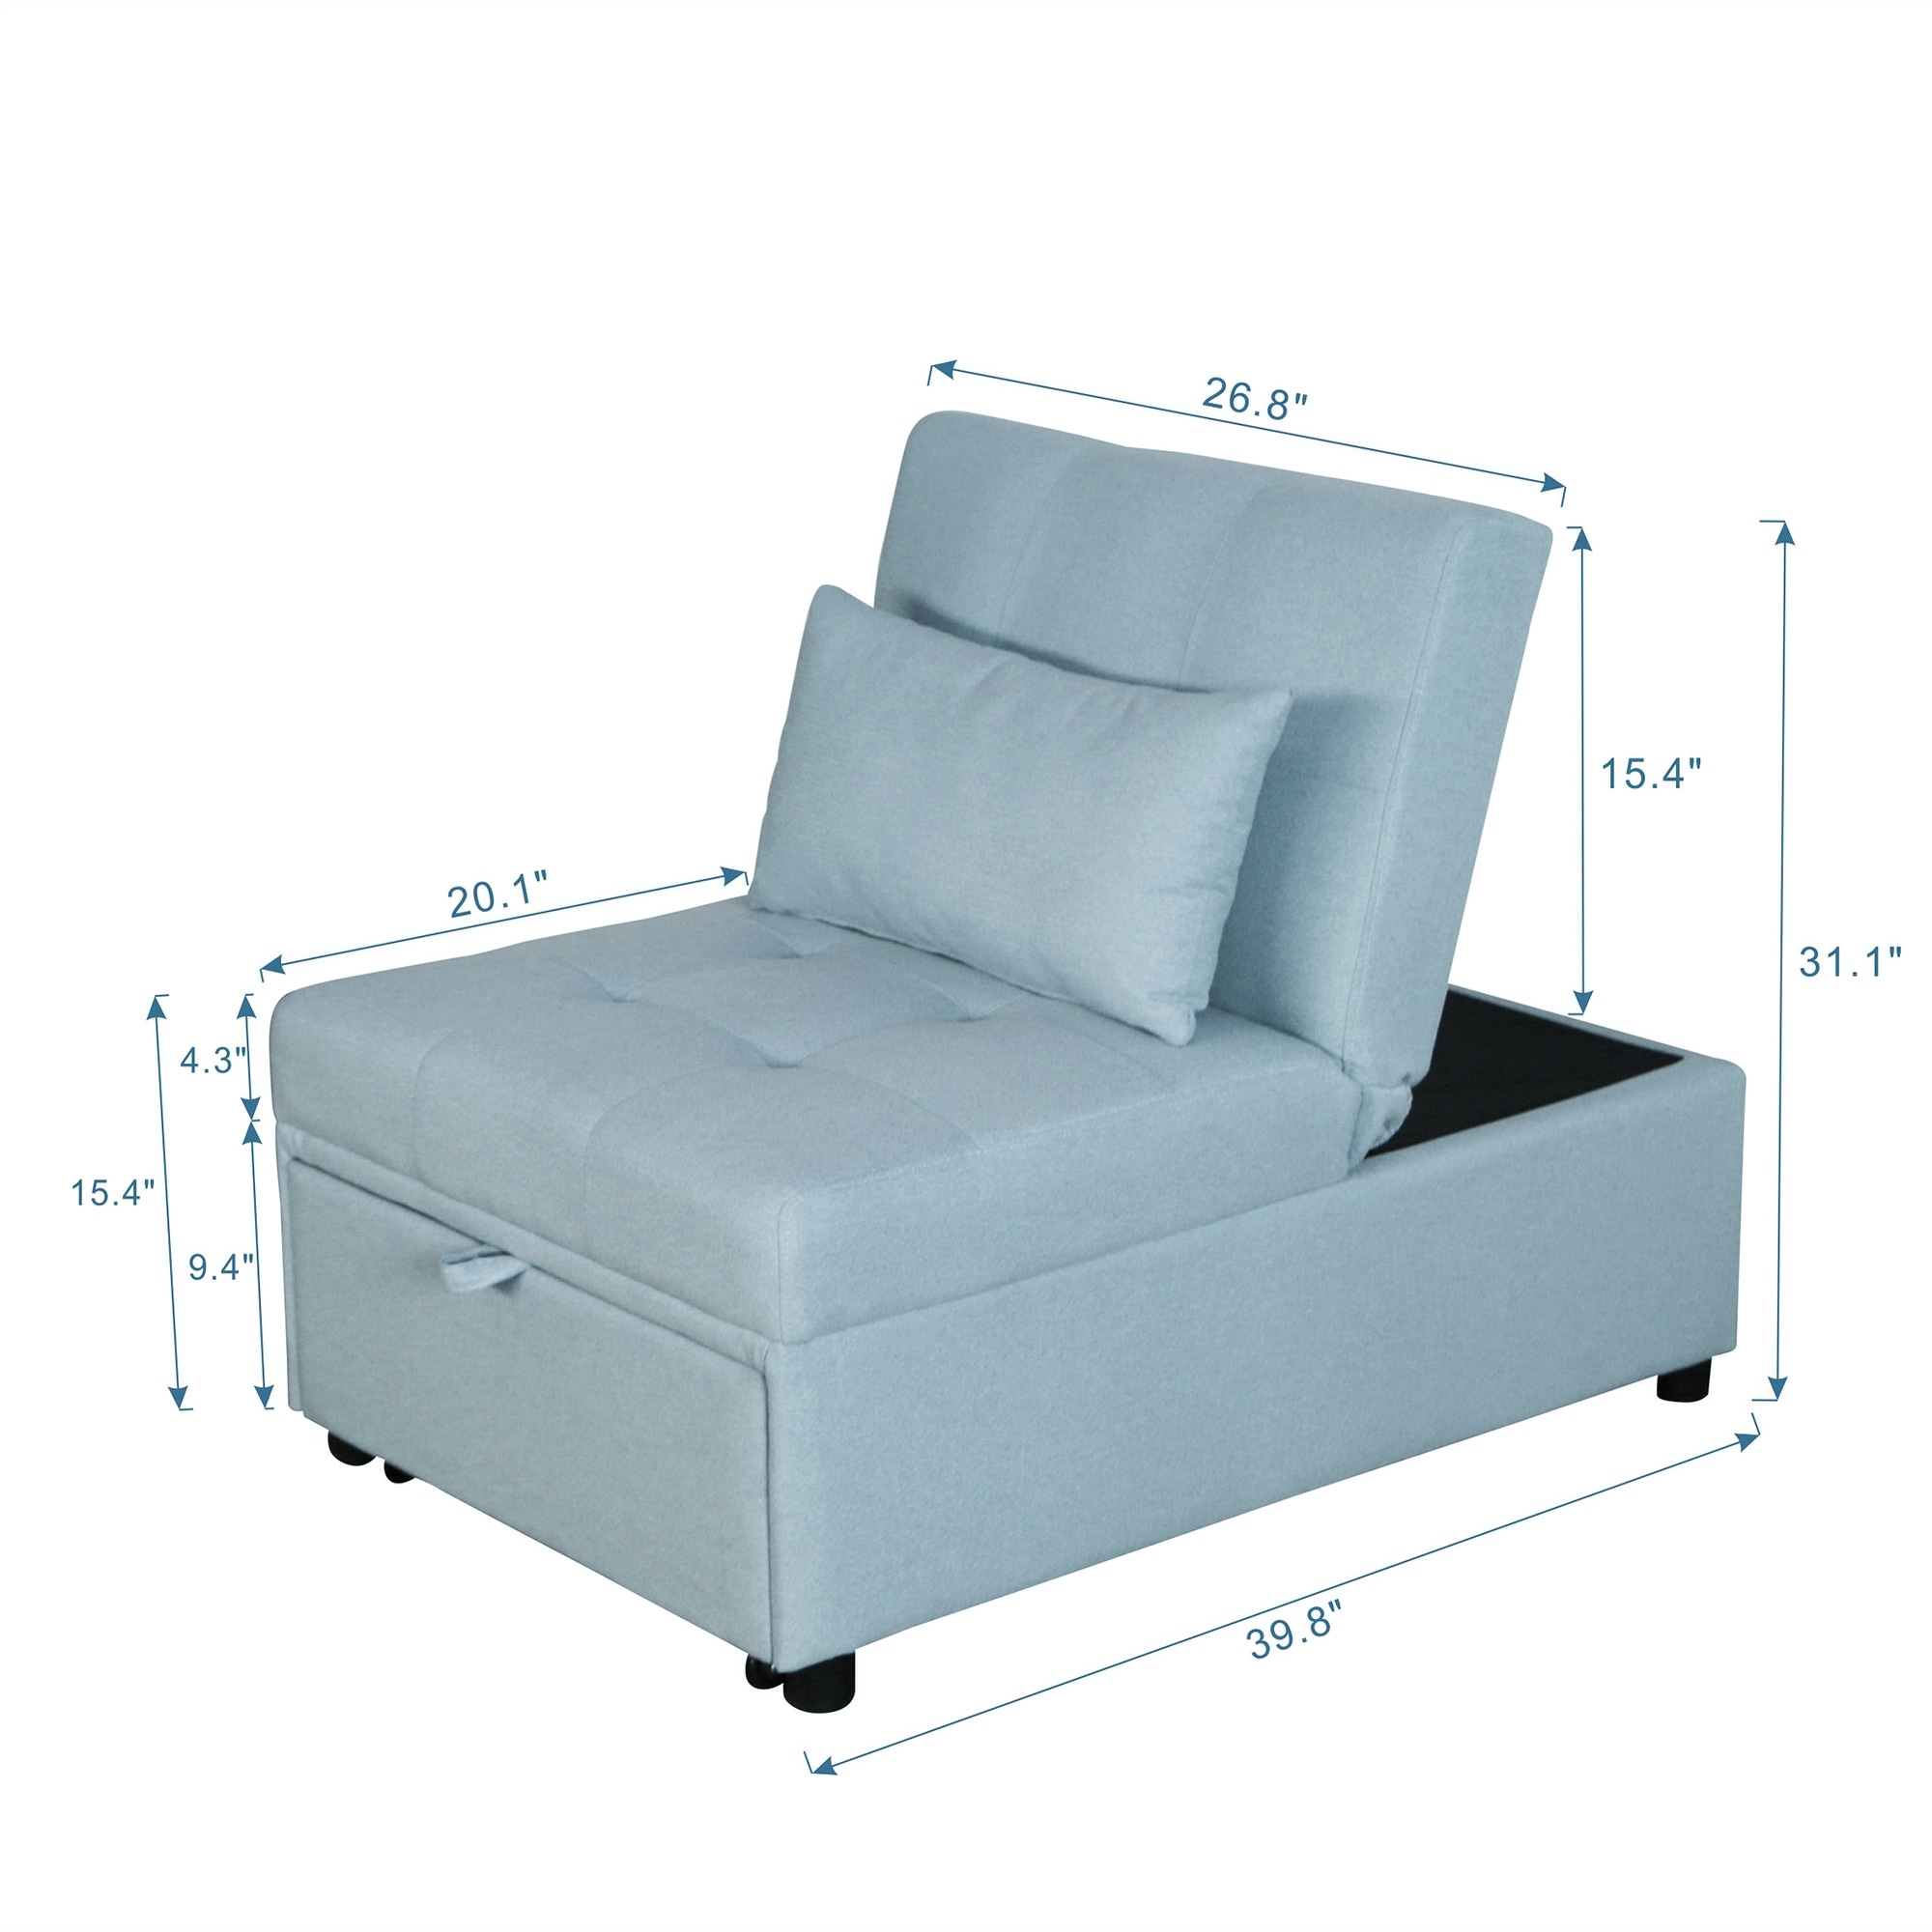 70.90" Single Sofa with Storage for Living Room, Apartment, Office, Collapsible Back Sofa, Armless Sofa, Sleeper Sofa